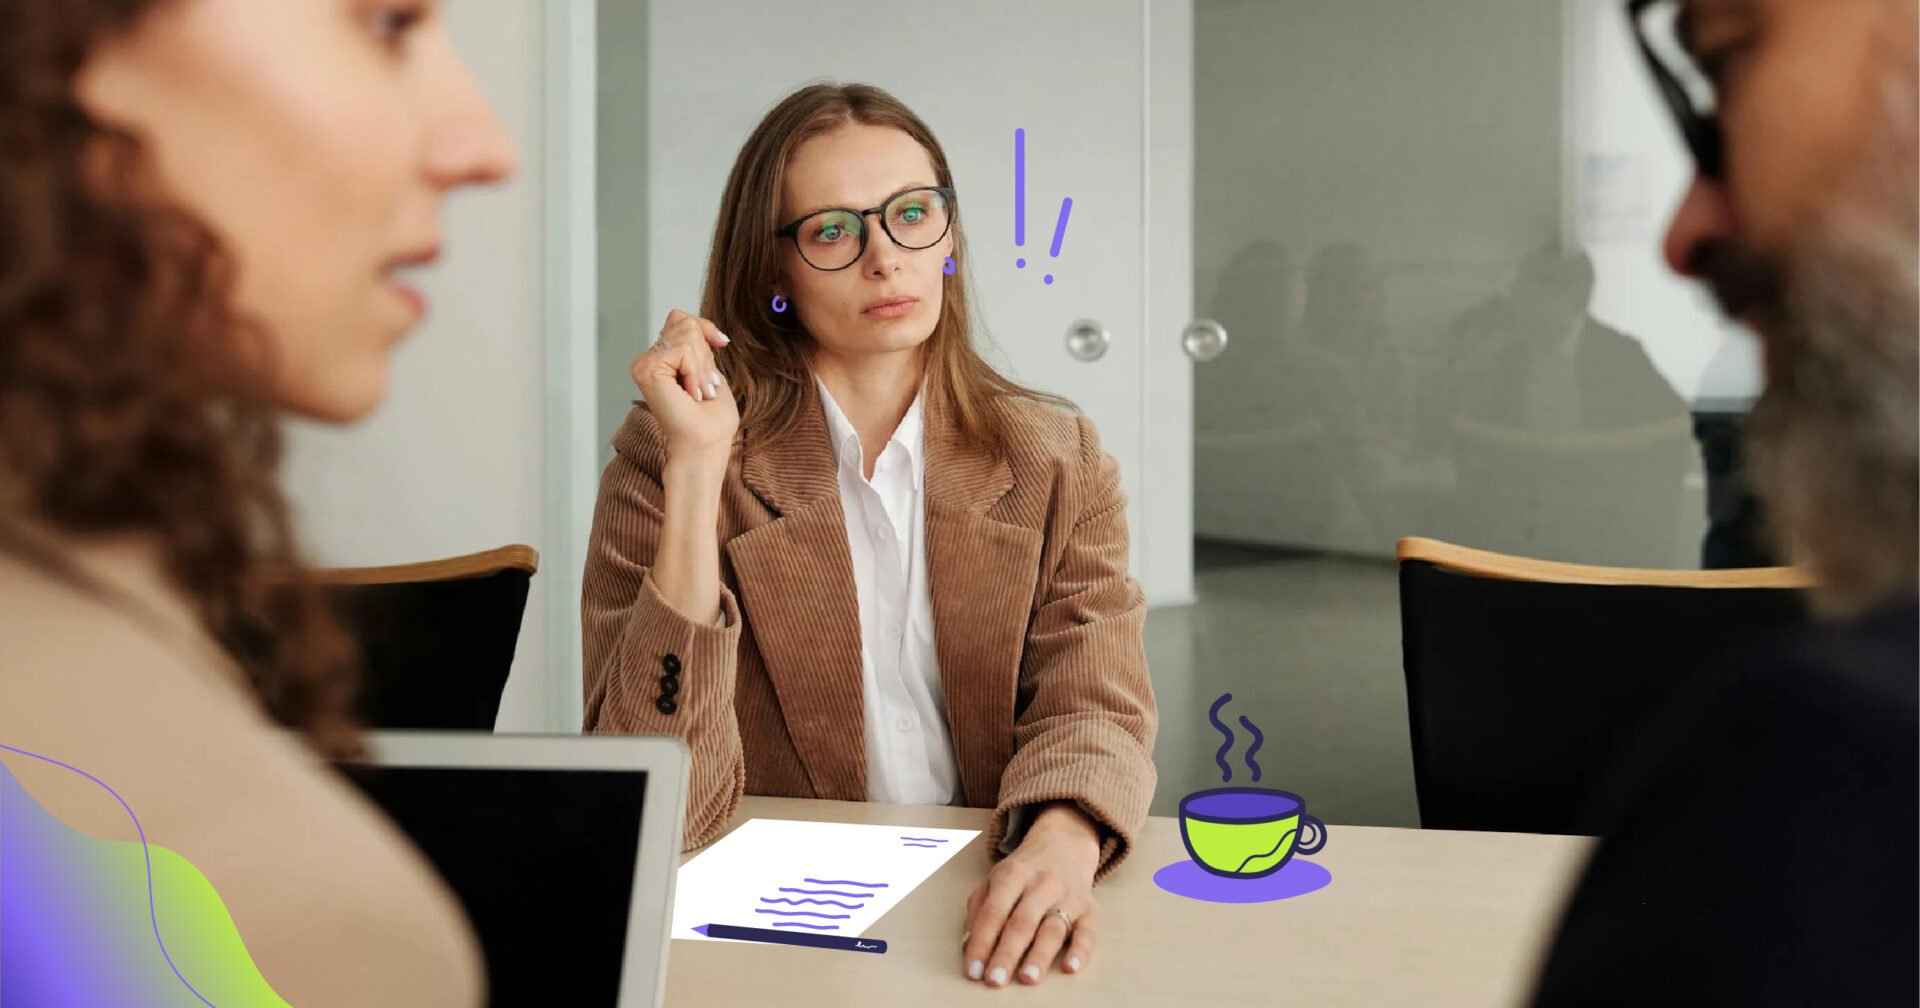 The worst job interview mistakes